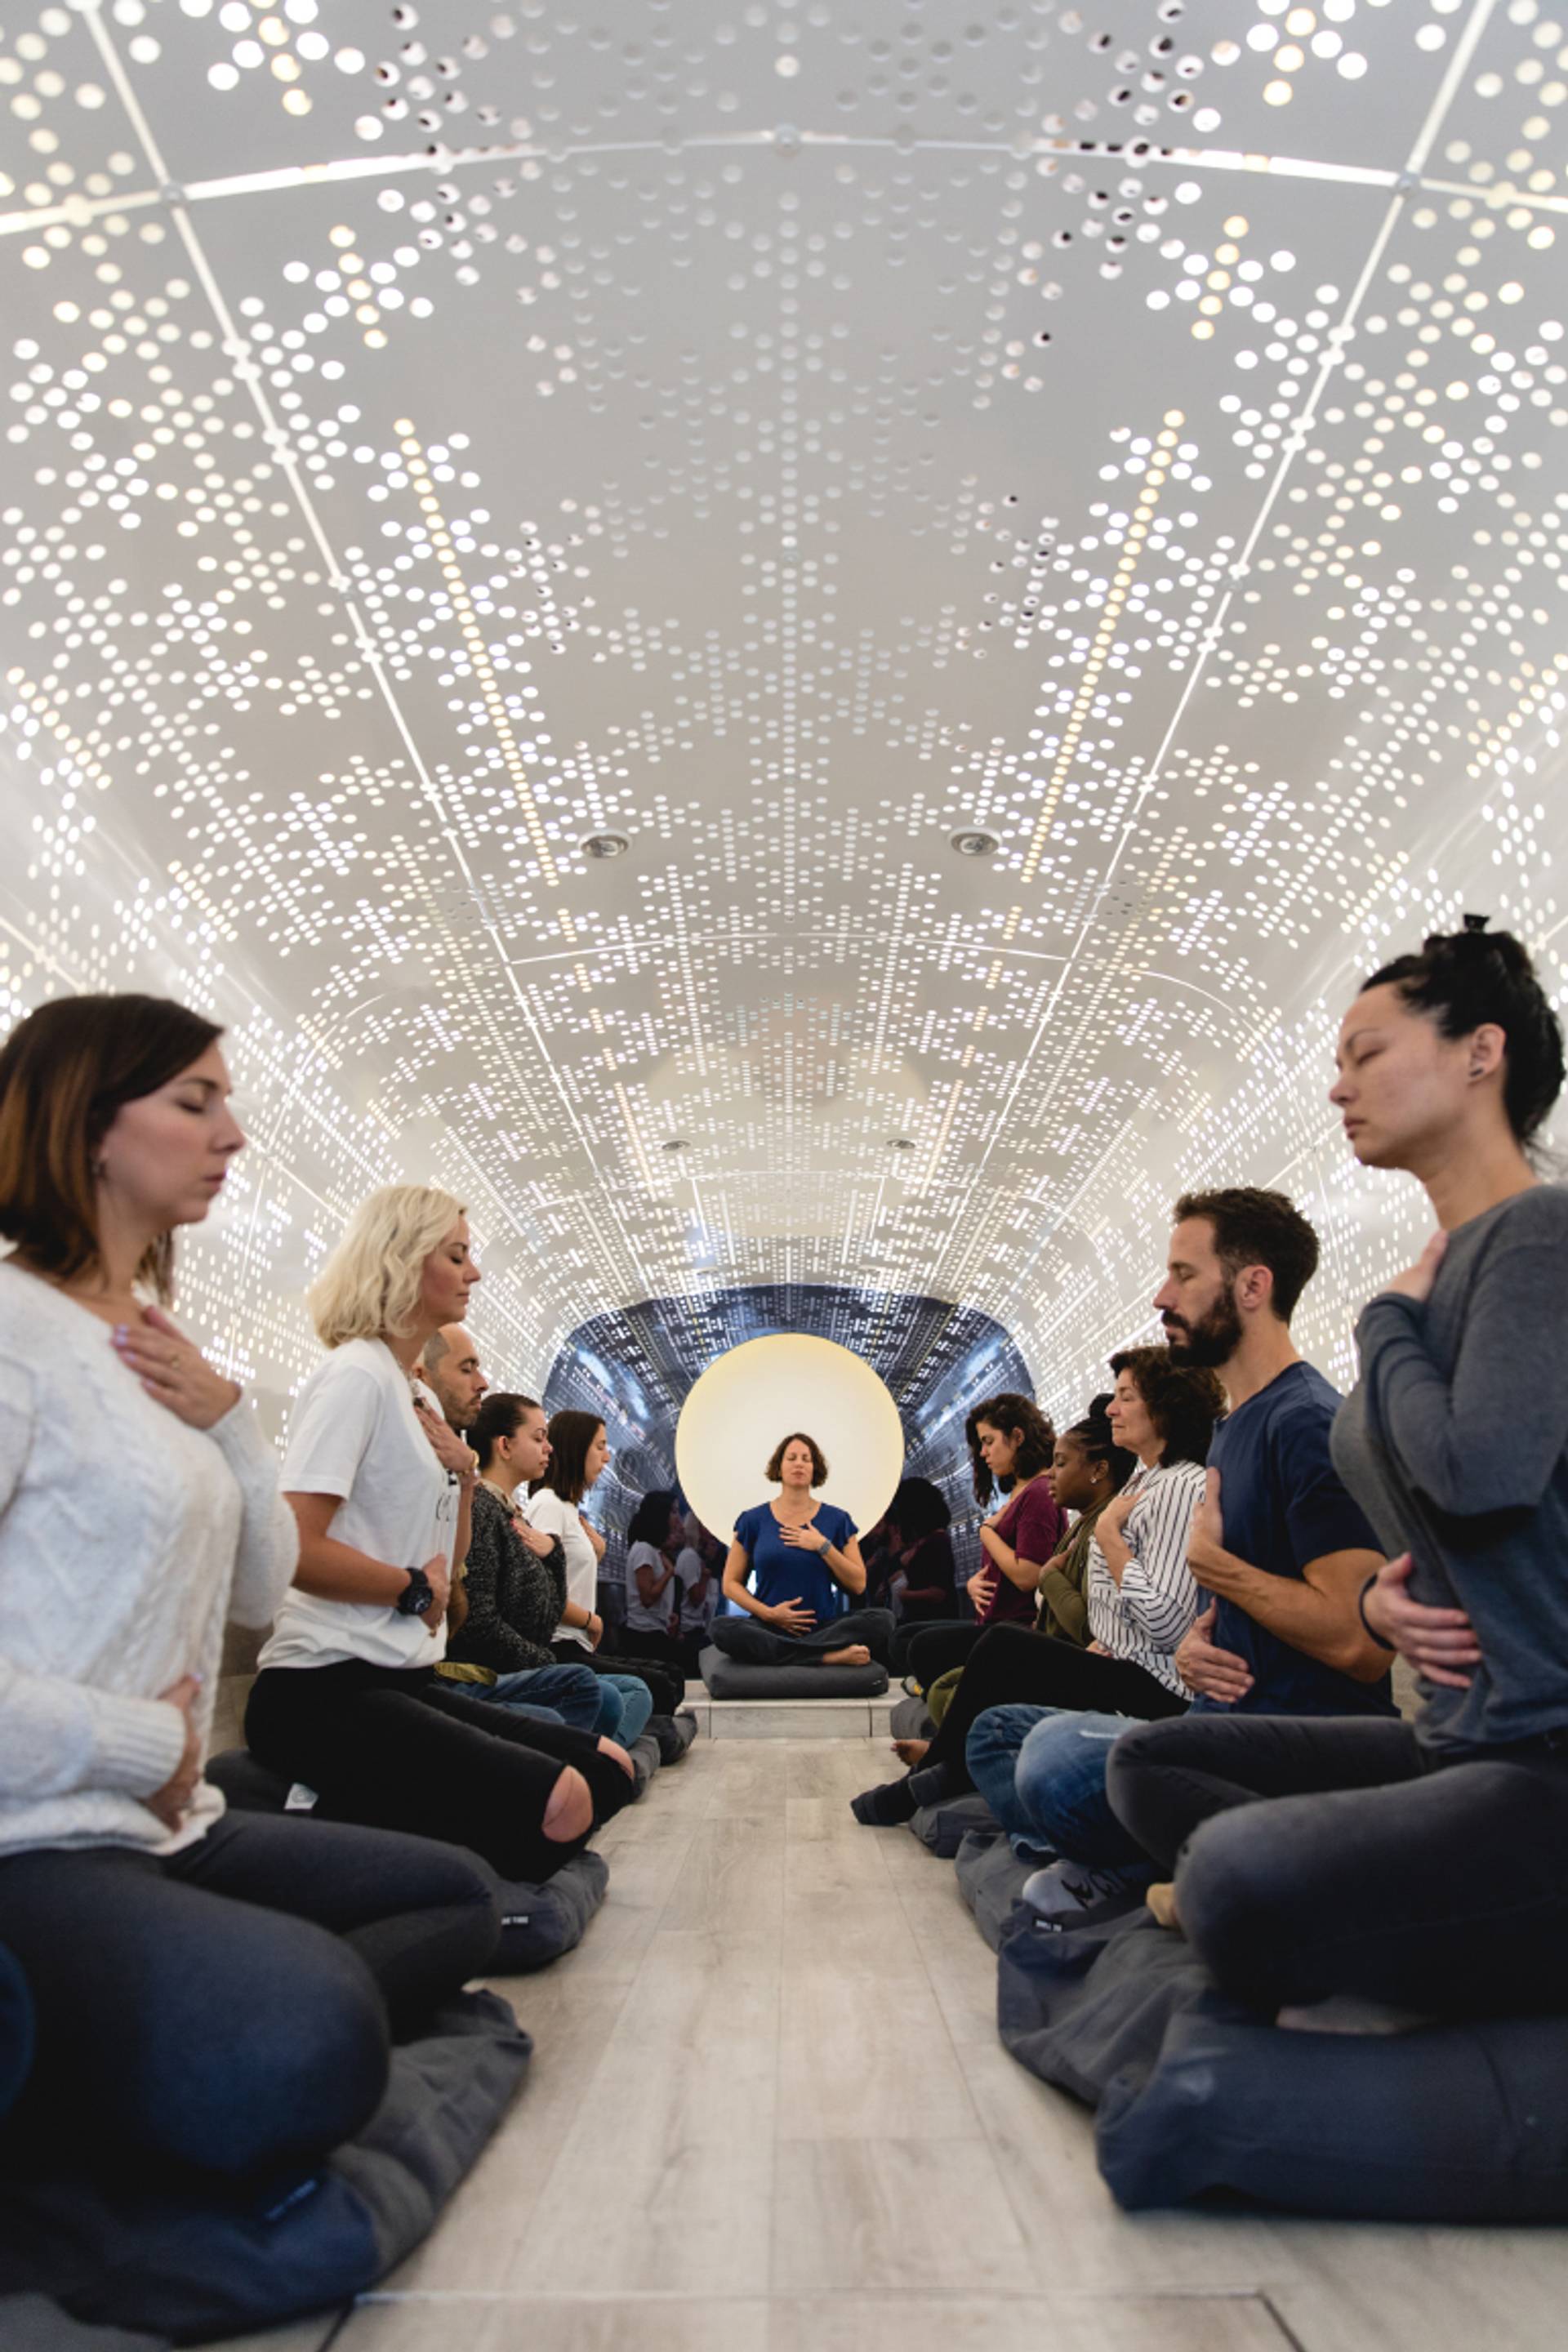 Be Time meditation bus offers convenient mindfulness